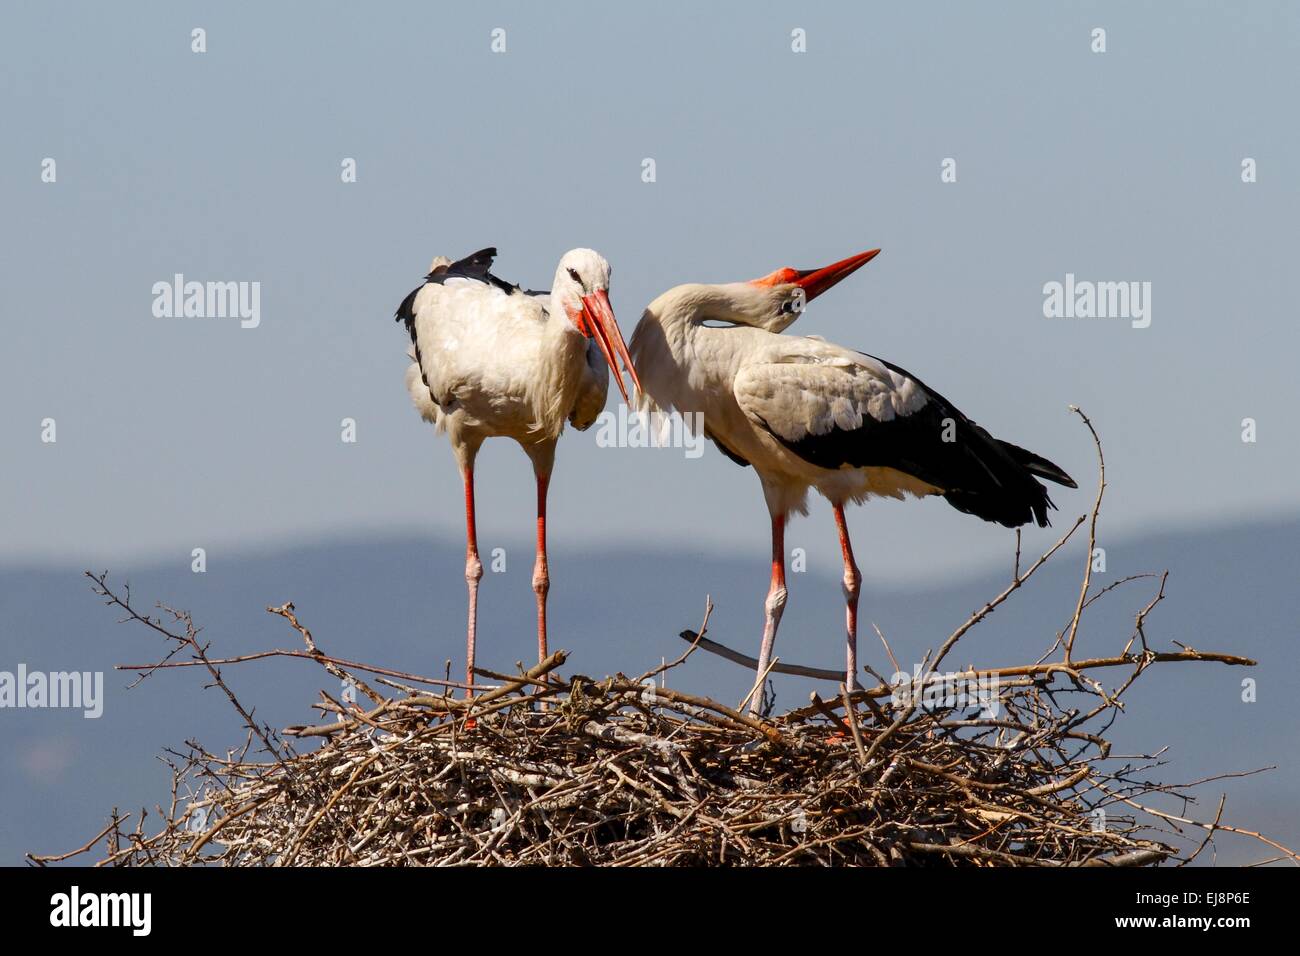 A couple of storks standing on their nest Stock Photo